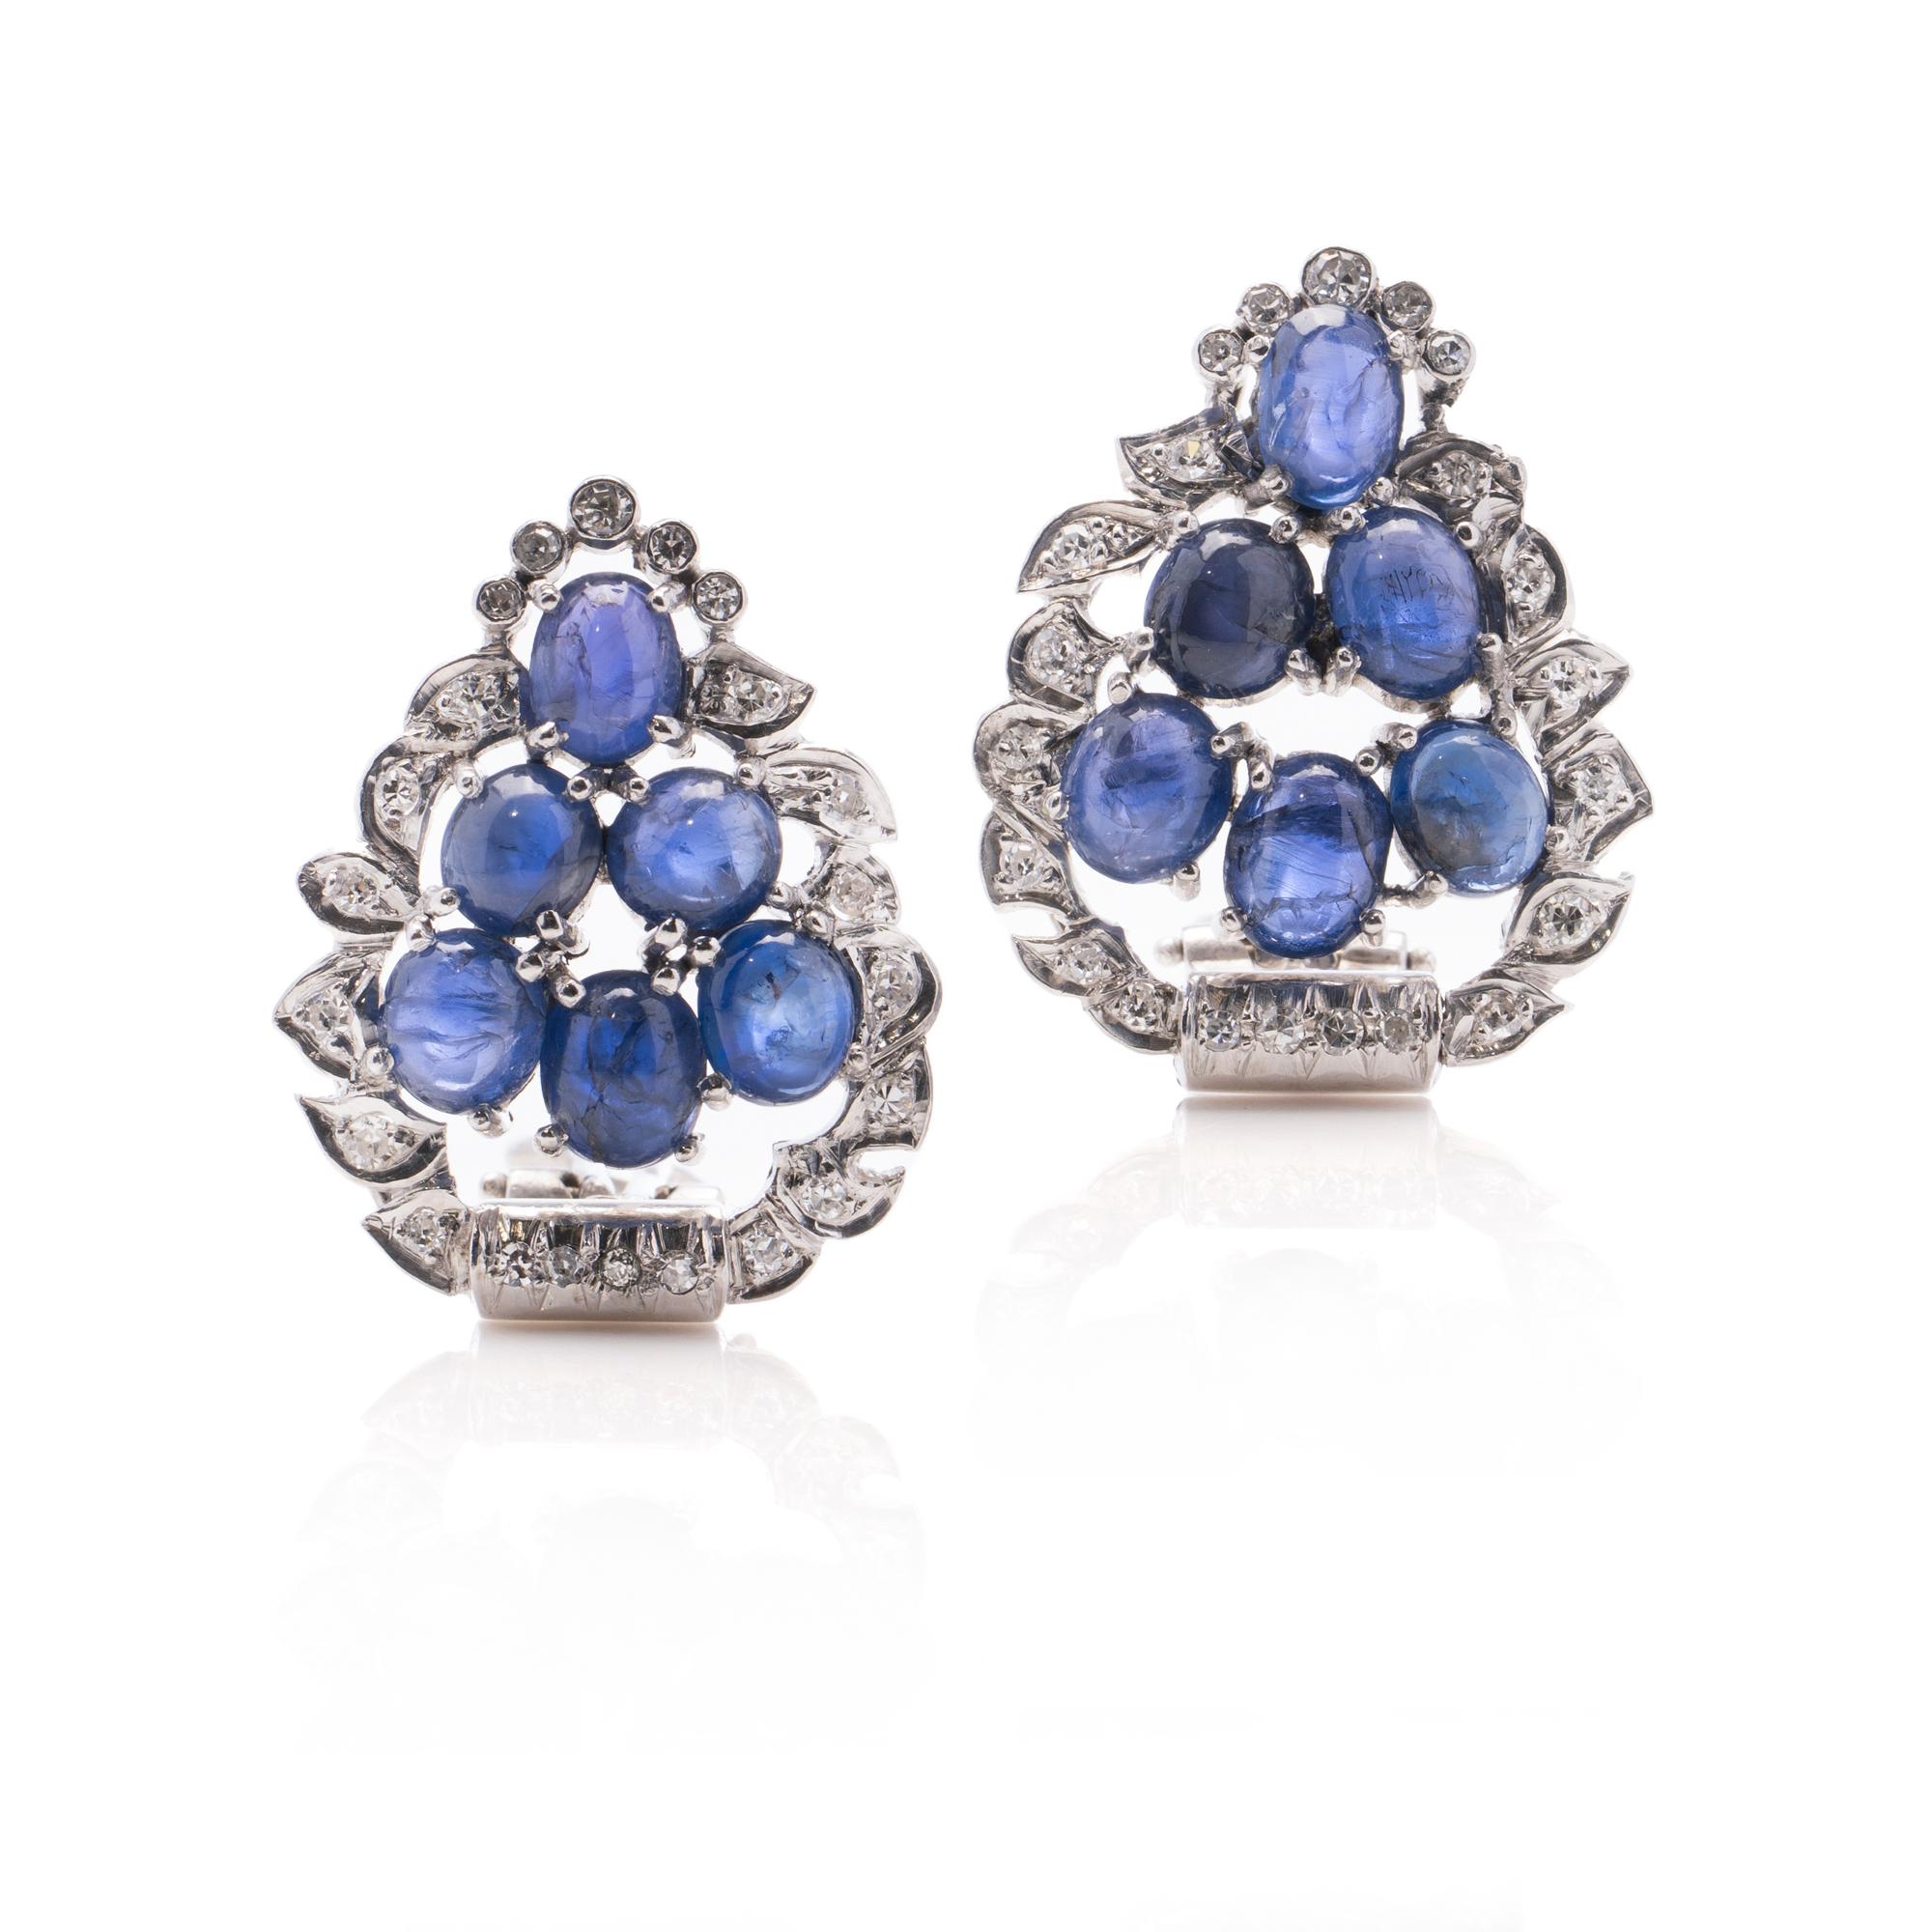 Presenting 18kt white gold clip-on earrings in the form of a leaf, adorned with beautiful natural blue sapphires and round brilliant diamonds.
These gorgeous earrings are the ideal combination of refinement and elegance, adding a bit of glitz to any